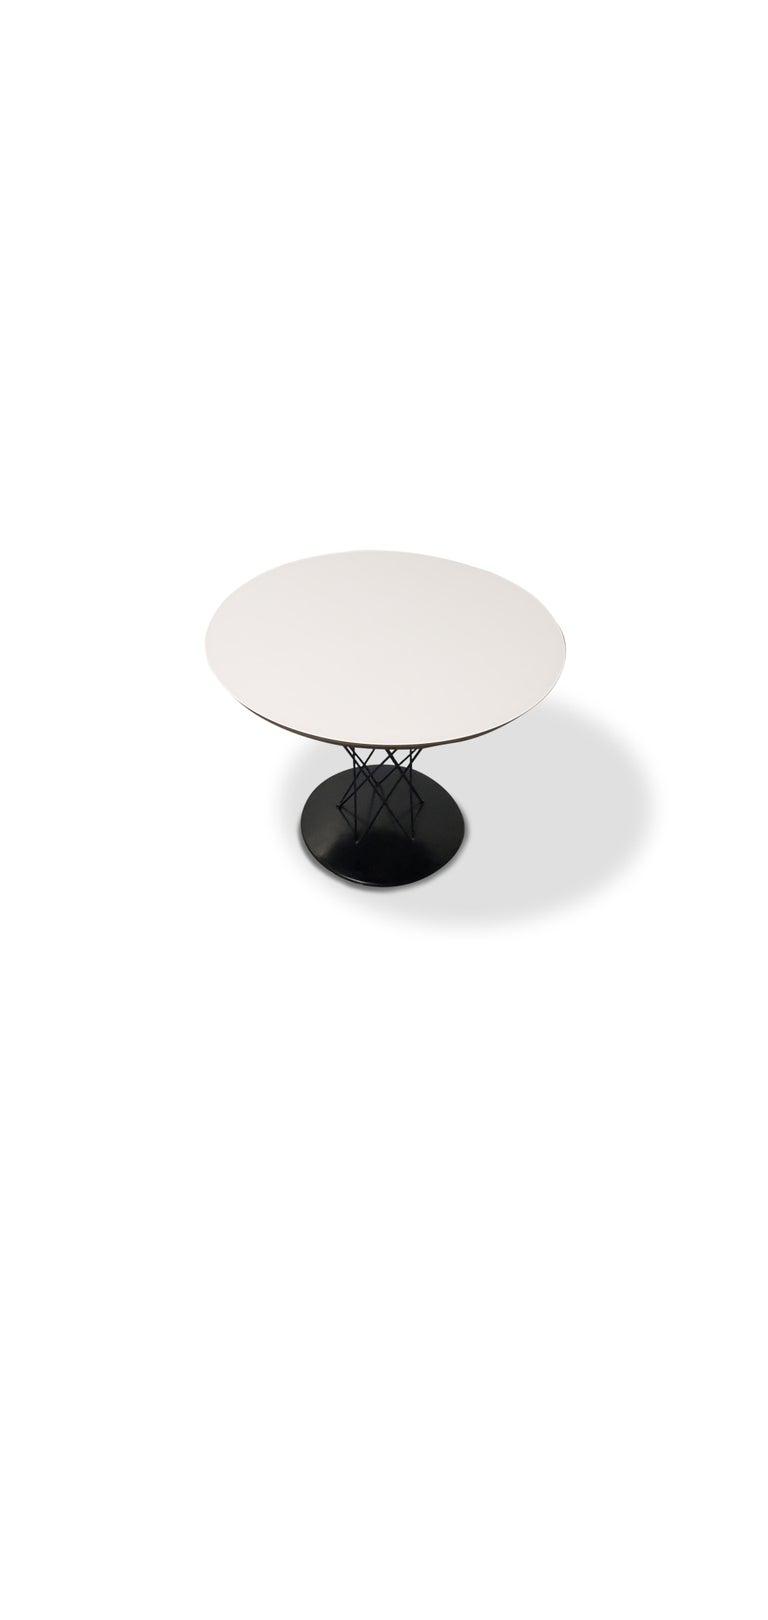 American Isamu Noguchi 'Cyclone' Side Table for Knoll For Sale